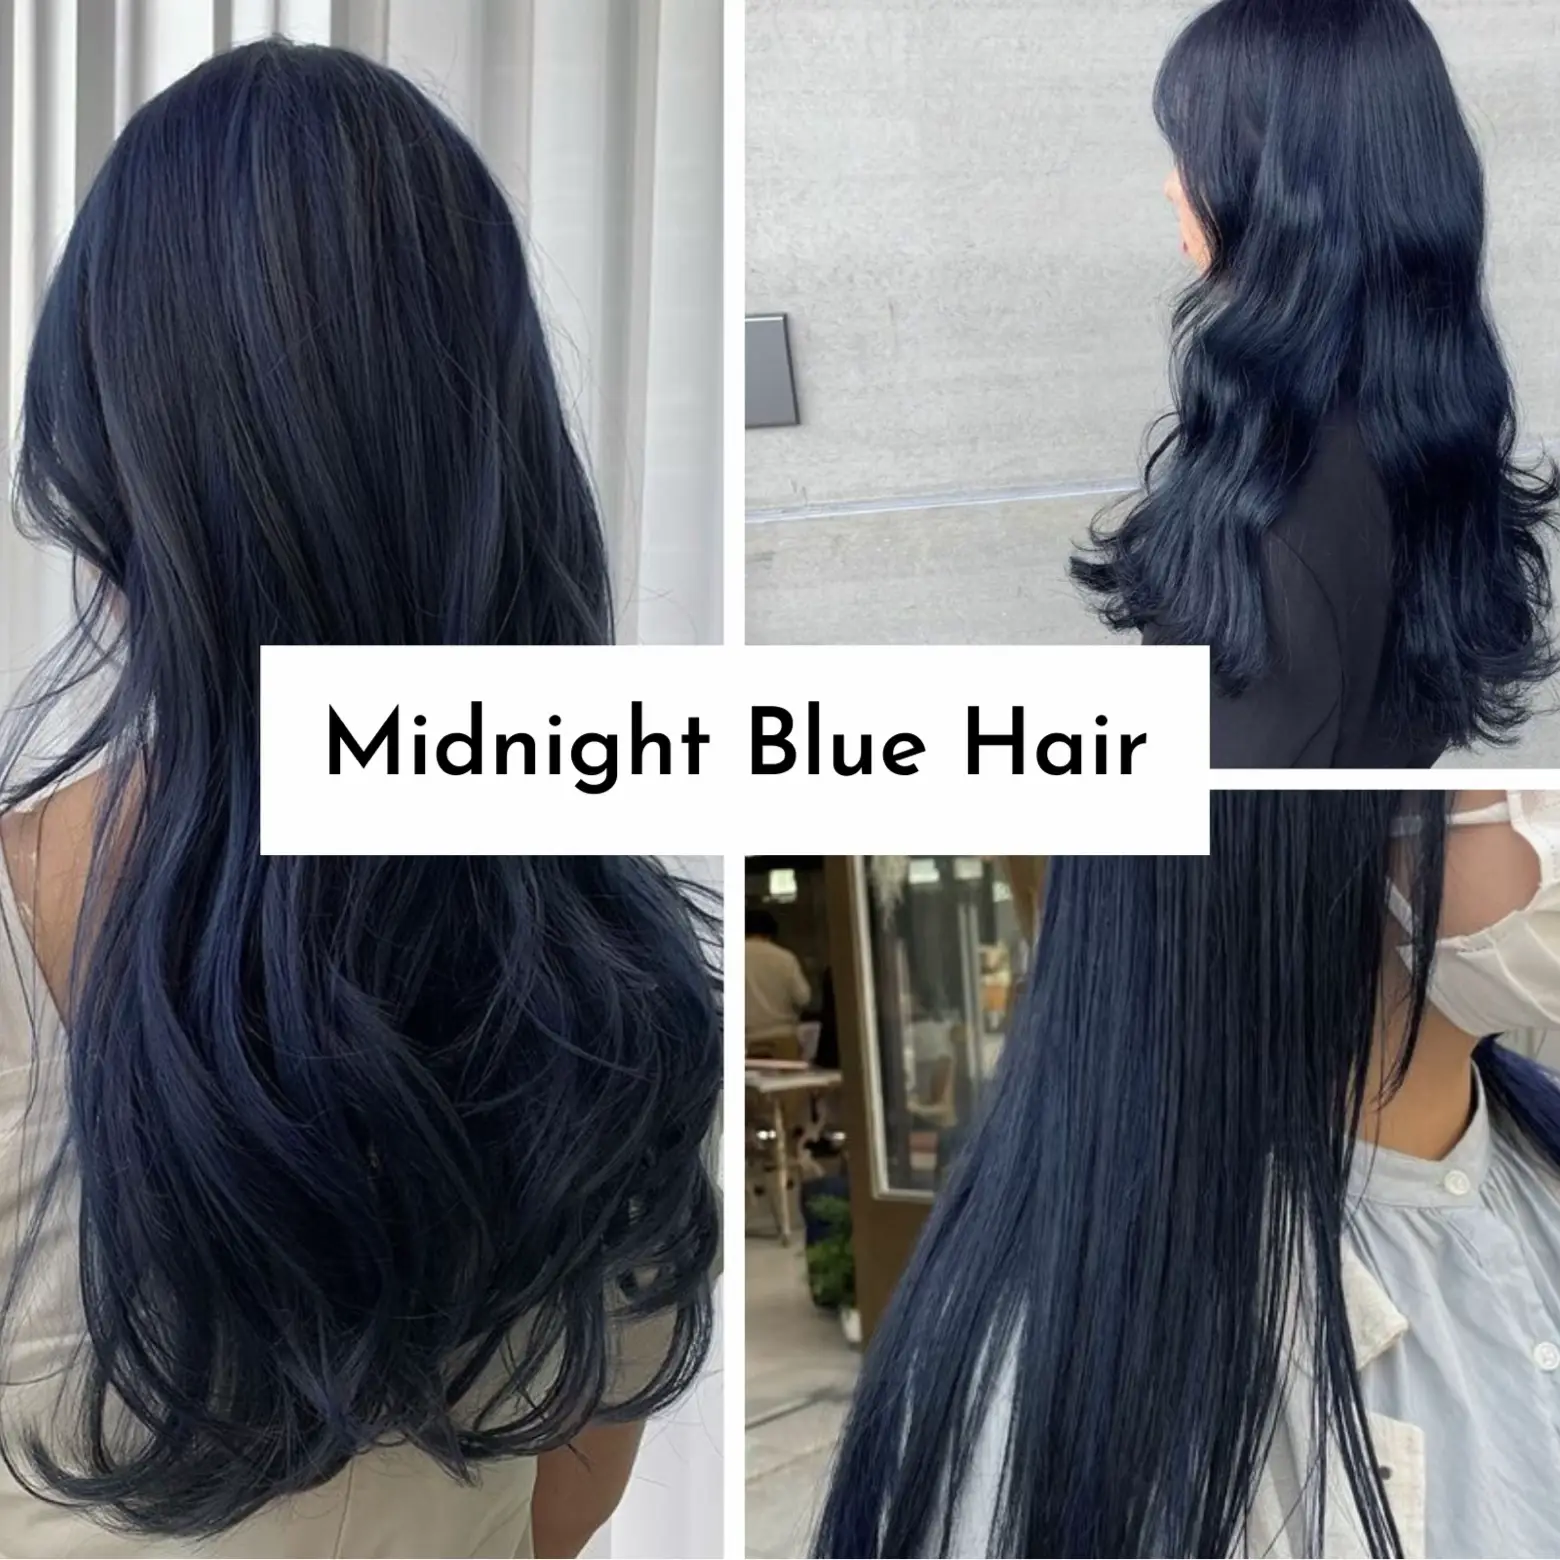 Blue Black Hair Color | Article posted by ᴀʏᴜ•Hairstylist | Lemon8